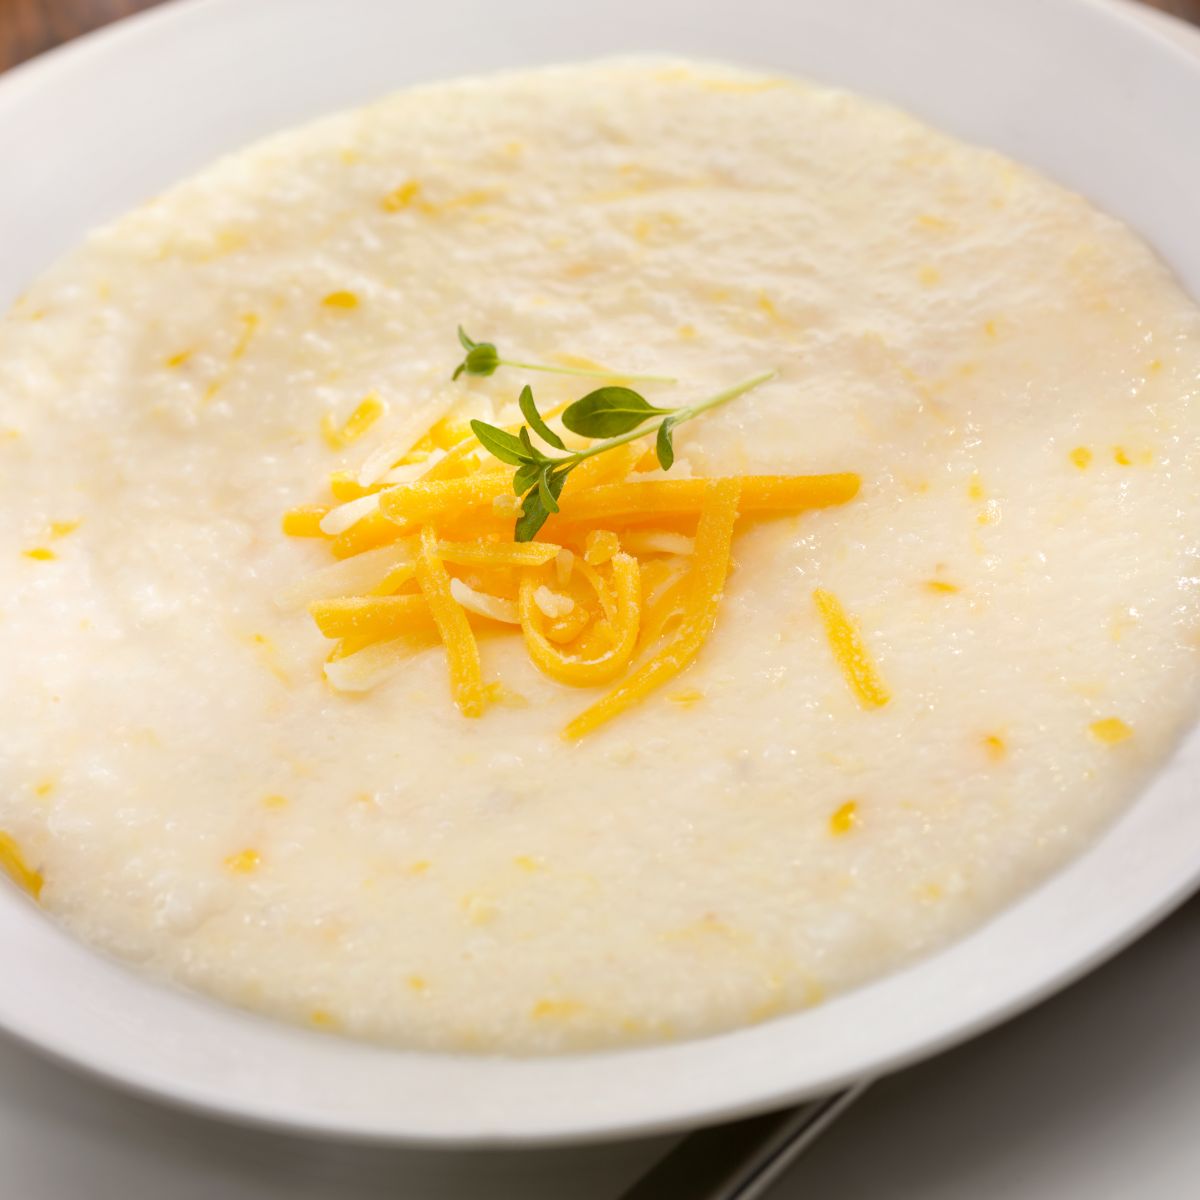 Bowl of grits with shredded cheese on top